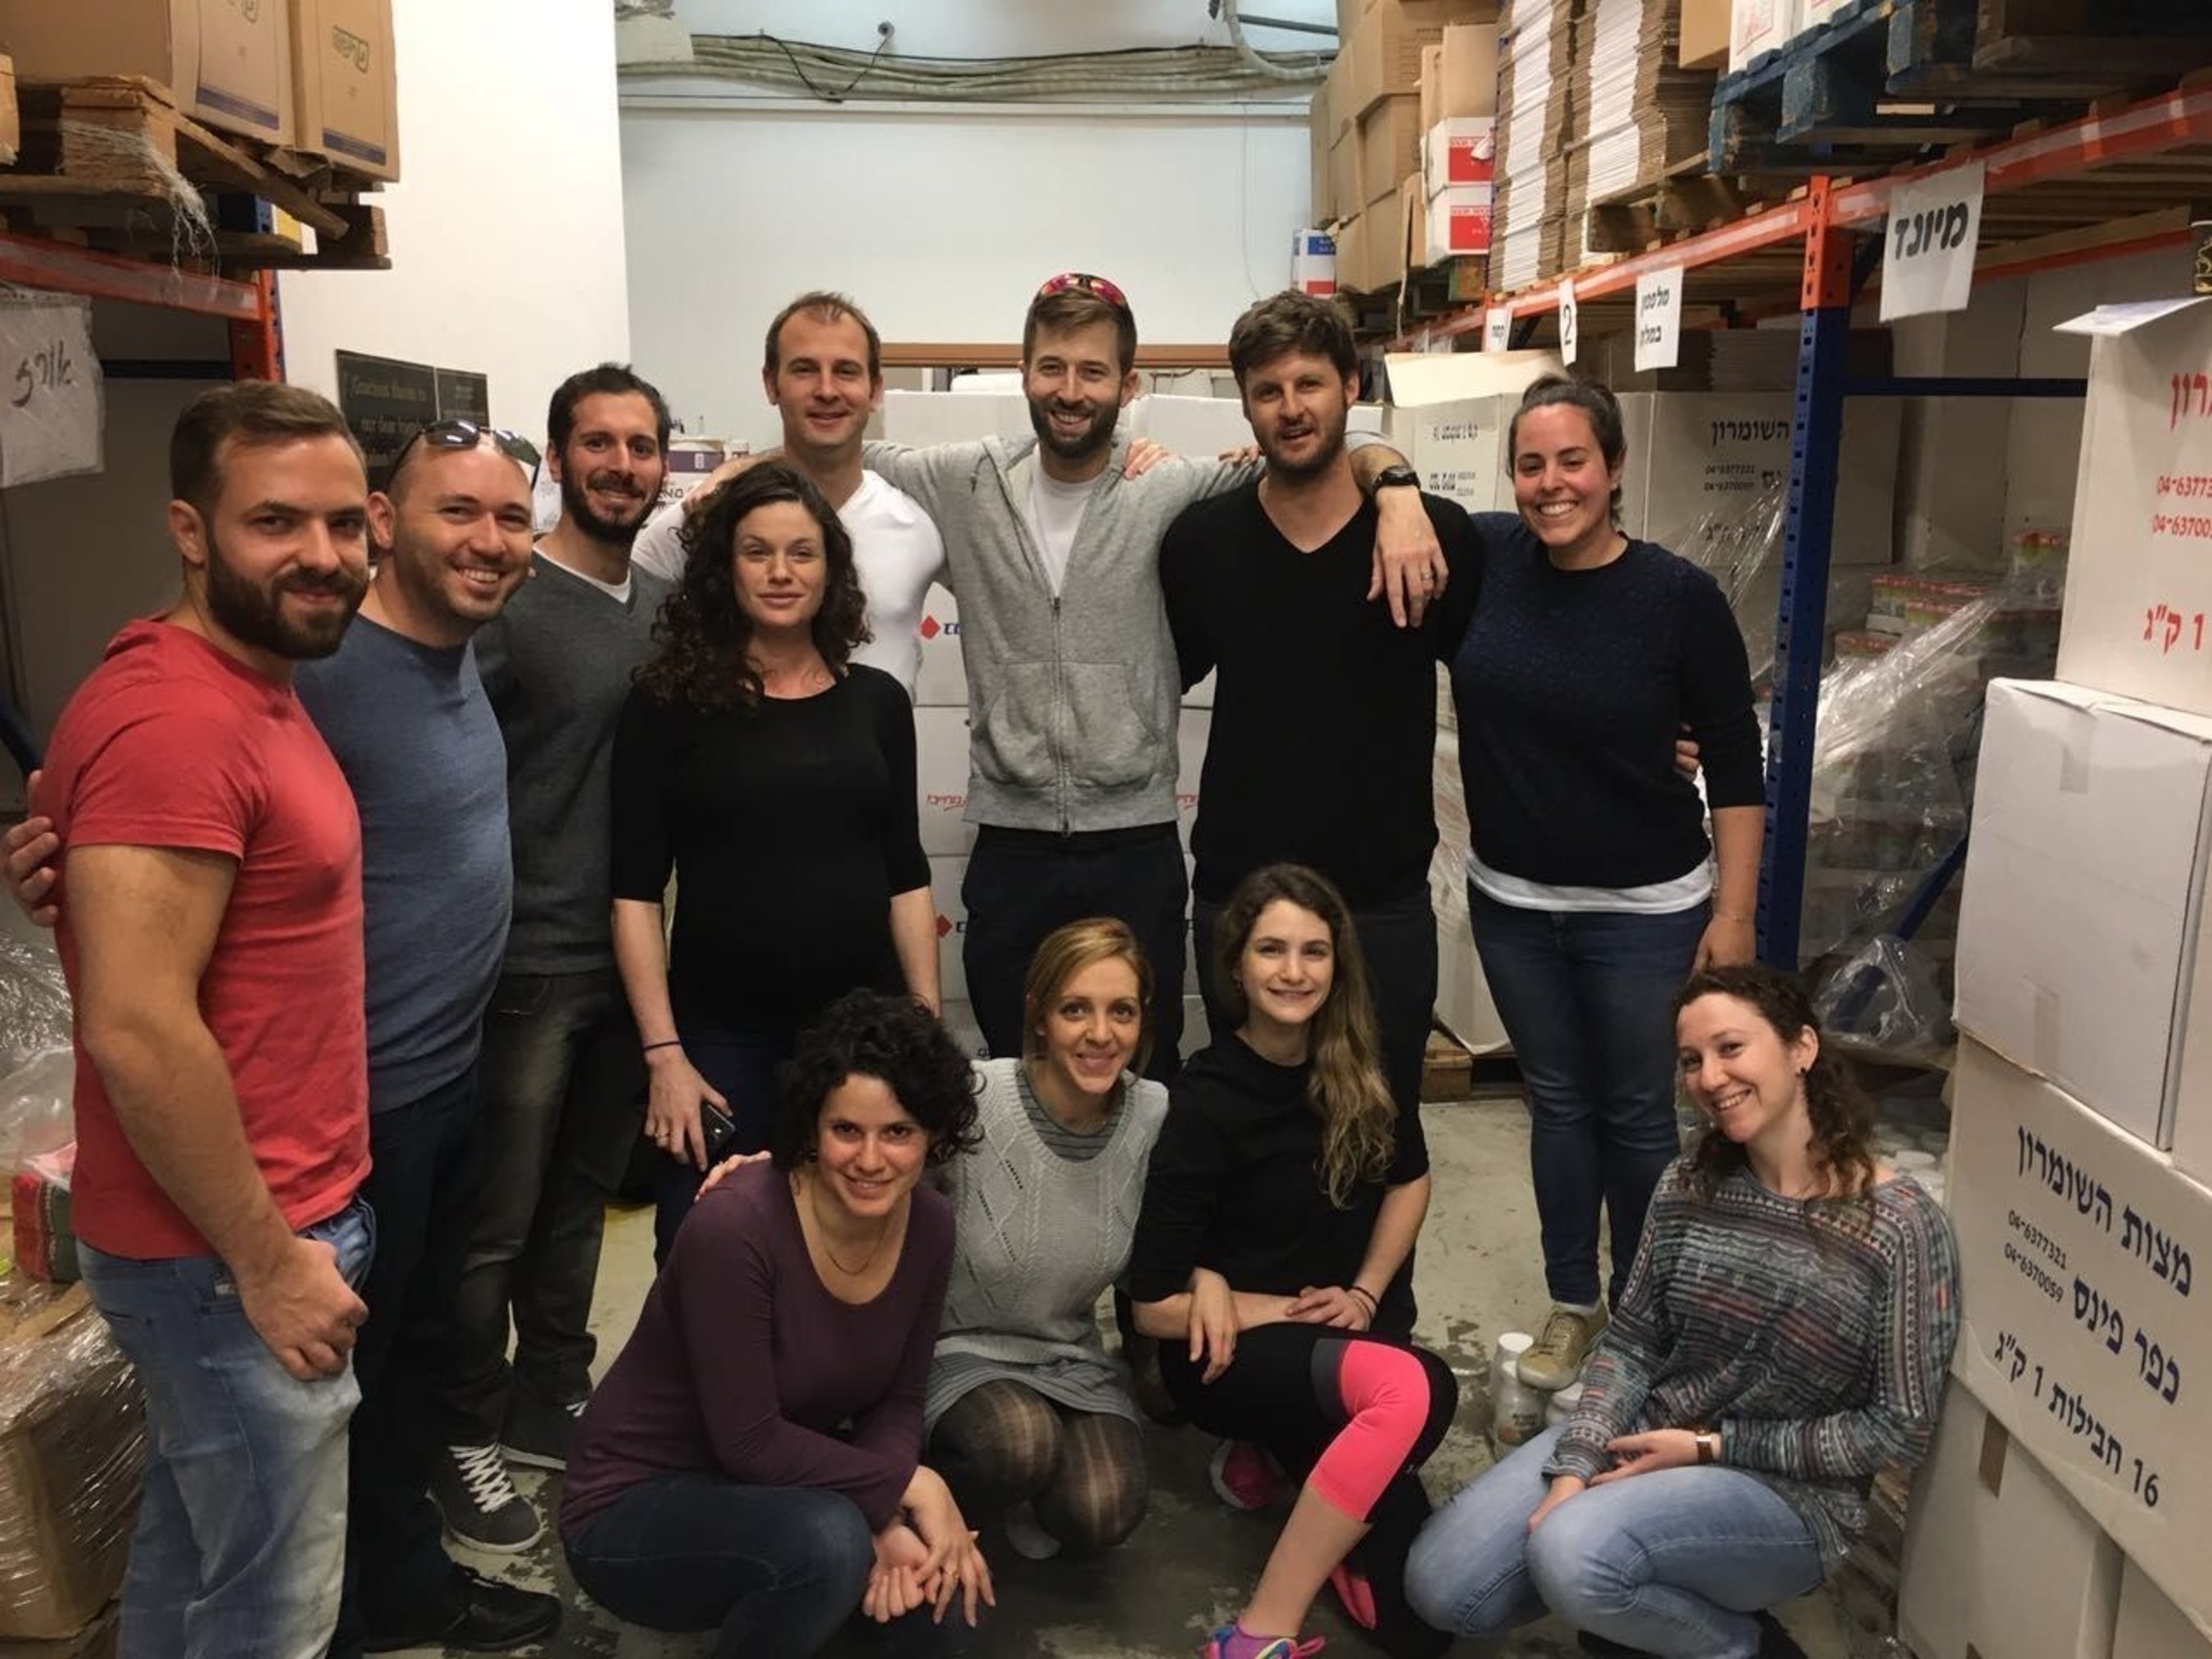 The photo shows some of the FX Empire team on Good Deeds Day packing boxes of much-needed food for the needy. The team volunteer each year on Good Deeds Day in addition to their weekly charity work.